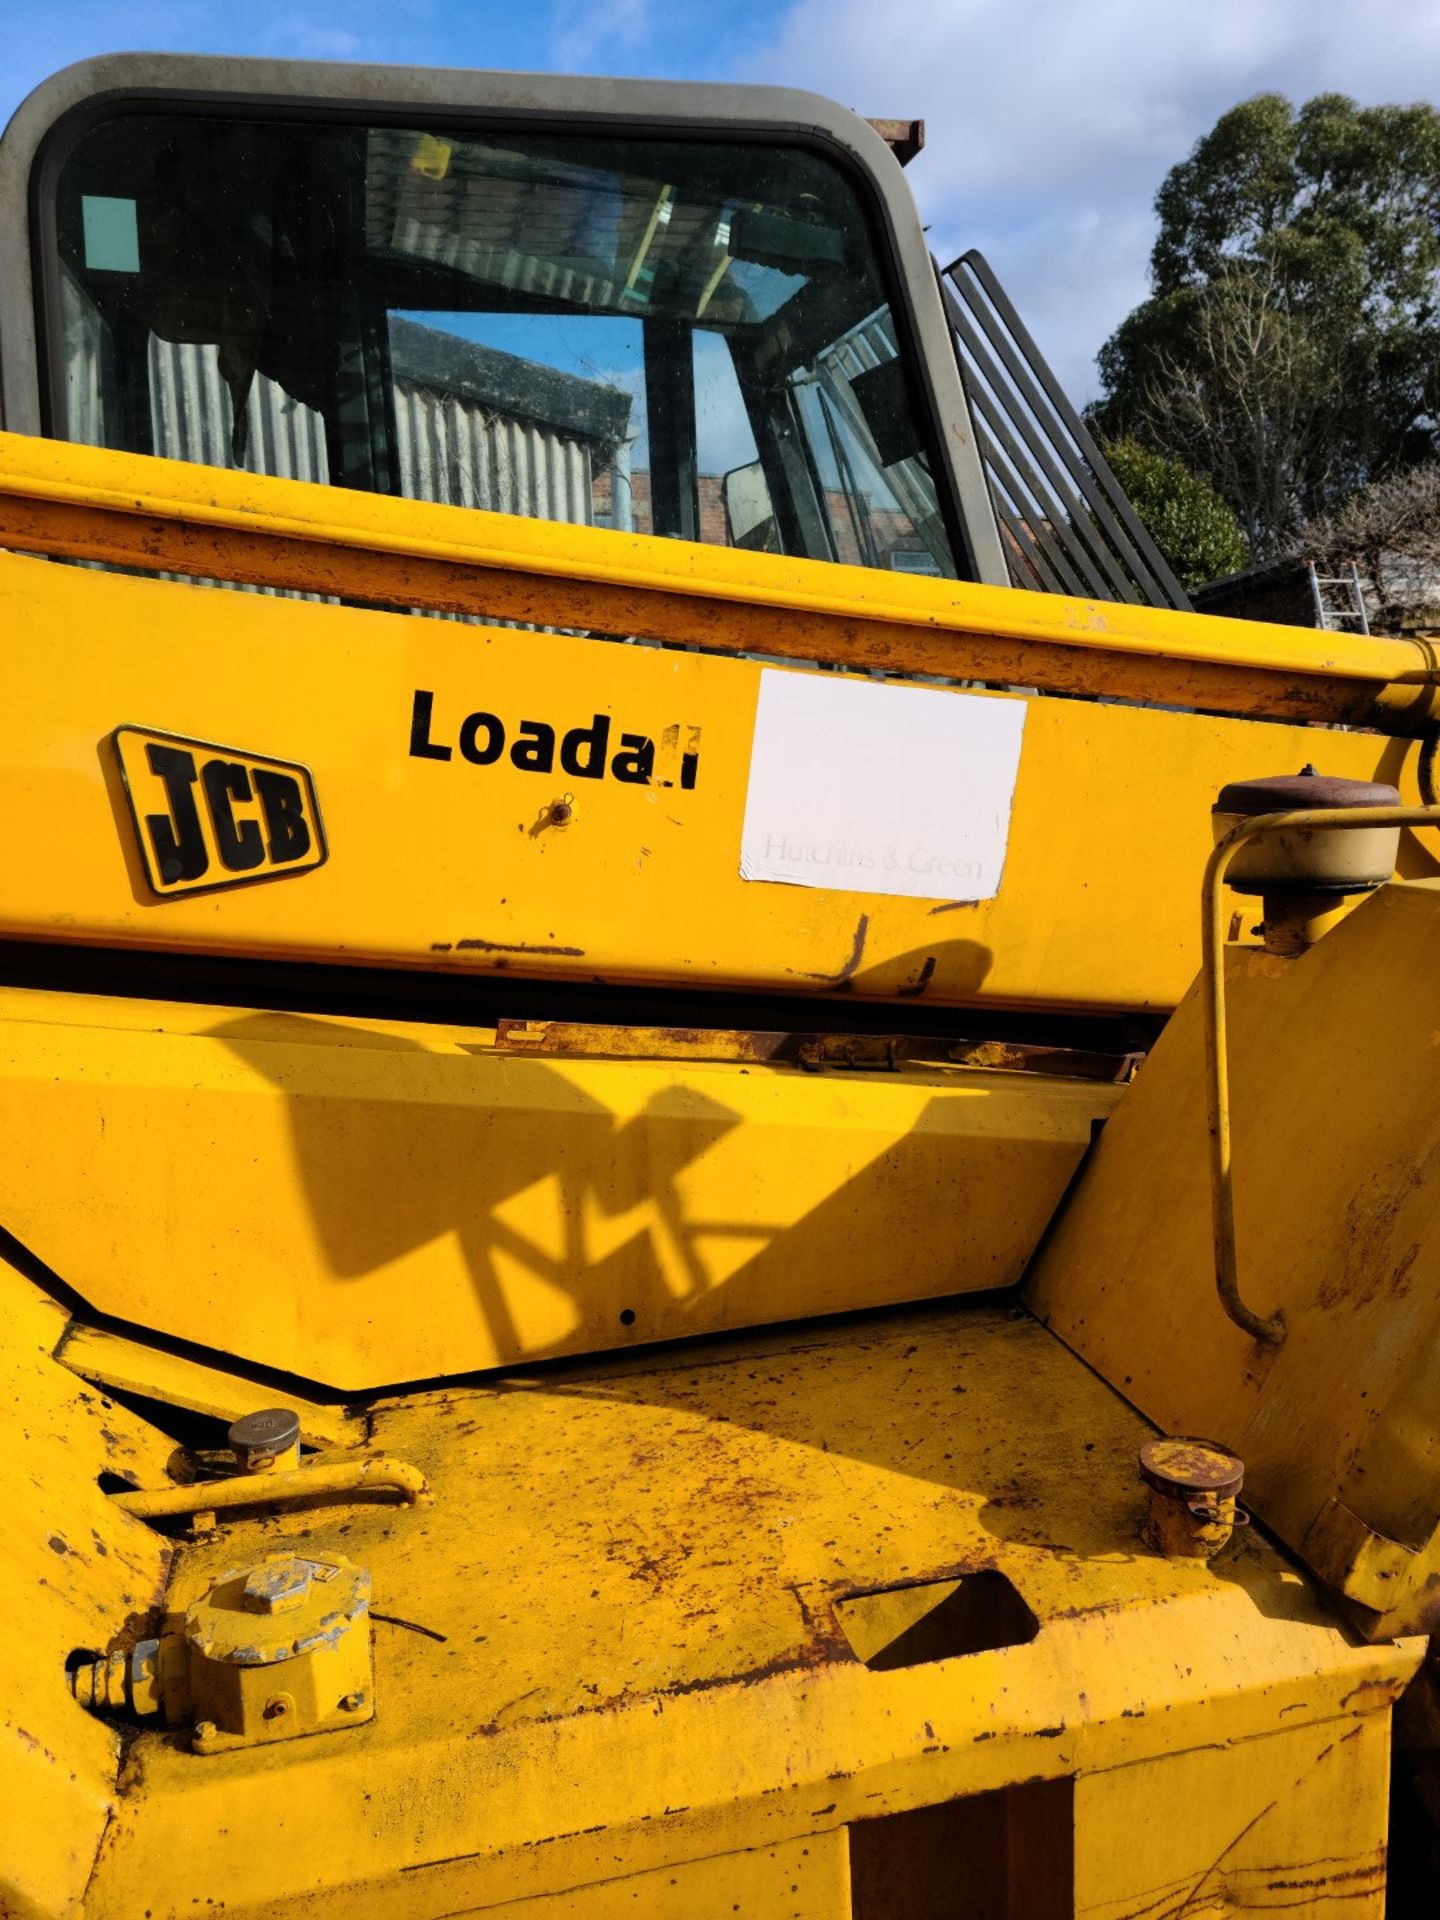 1 x JCB Loadall Telehandler 530-120 - 7540 Hours - CL846 - Location: Oxford OX2 - Image 10 of 49